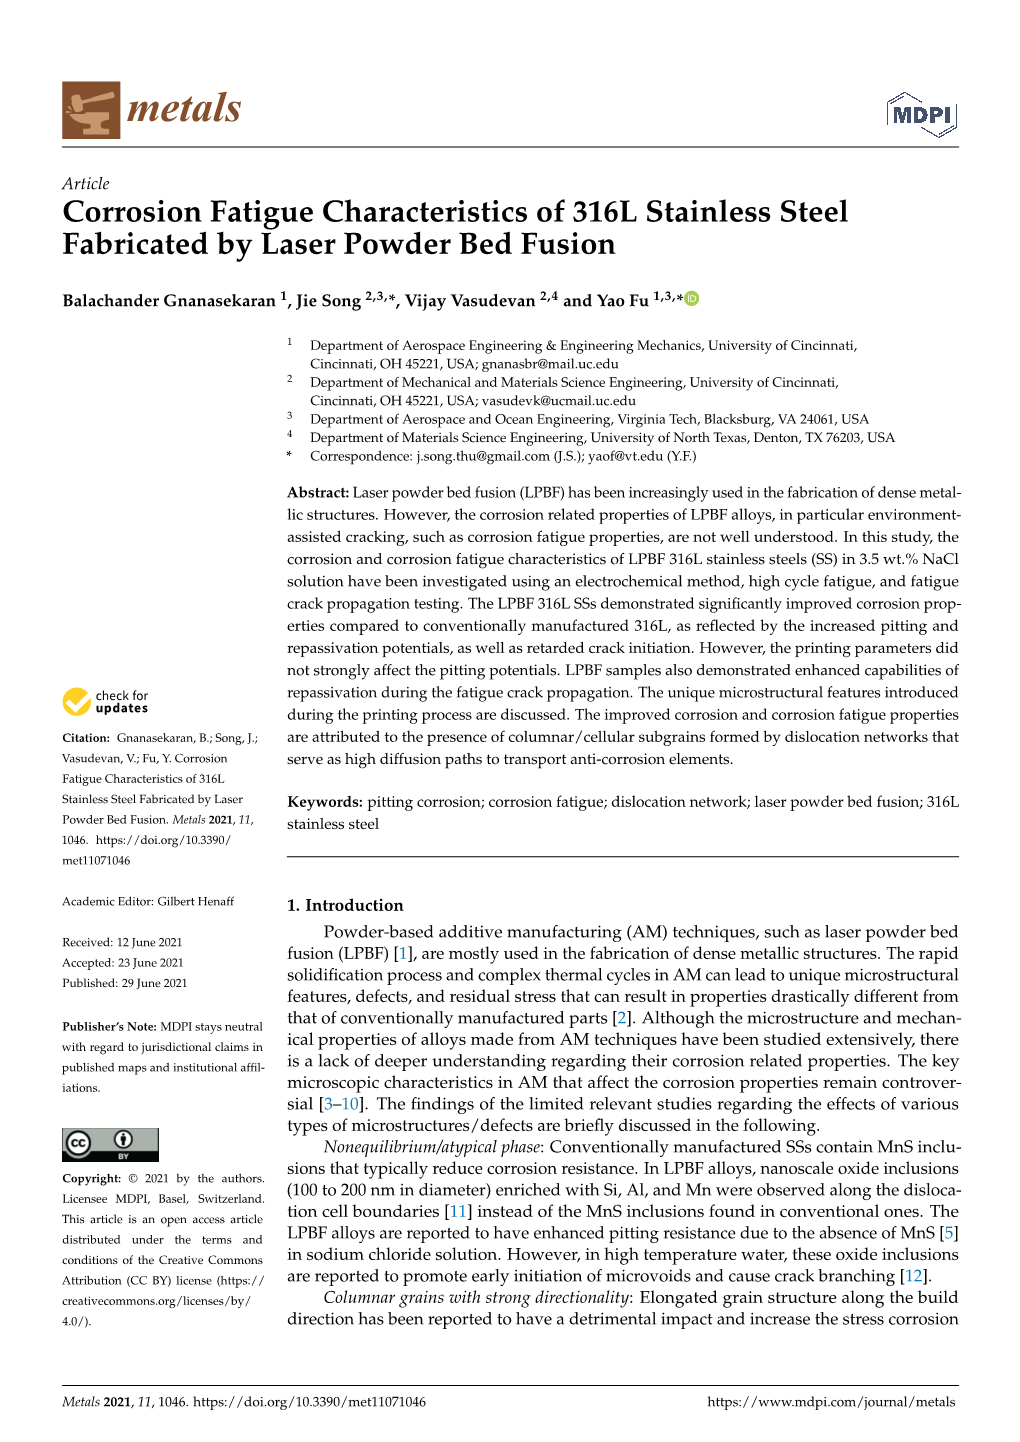 Corrosion Fatigue Characteristics of 316L Stainless Steel Fabricated by Laser Powder Bed Fusion